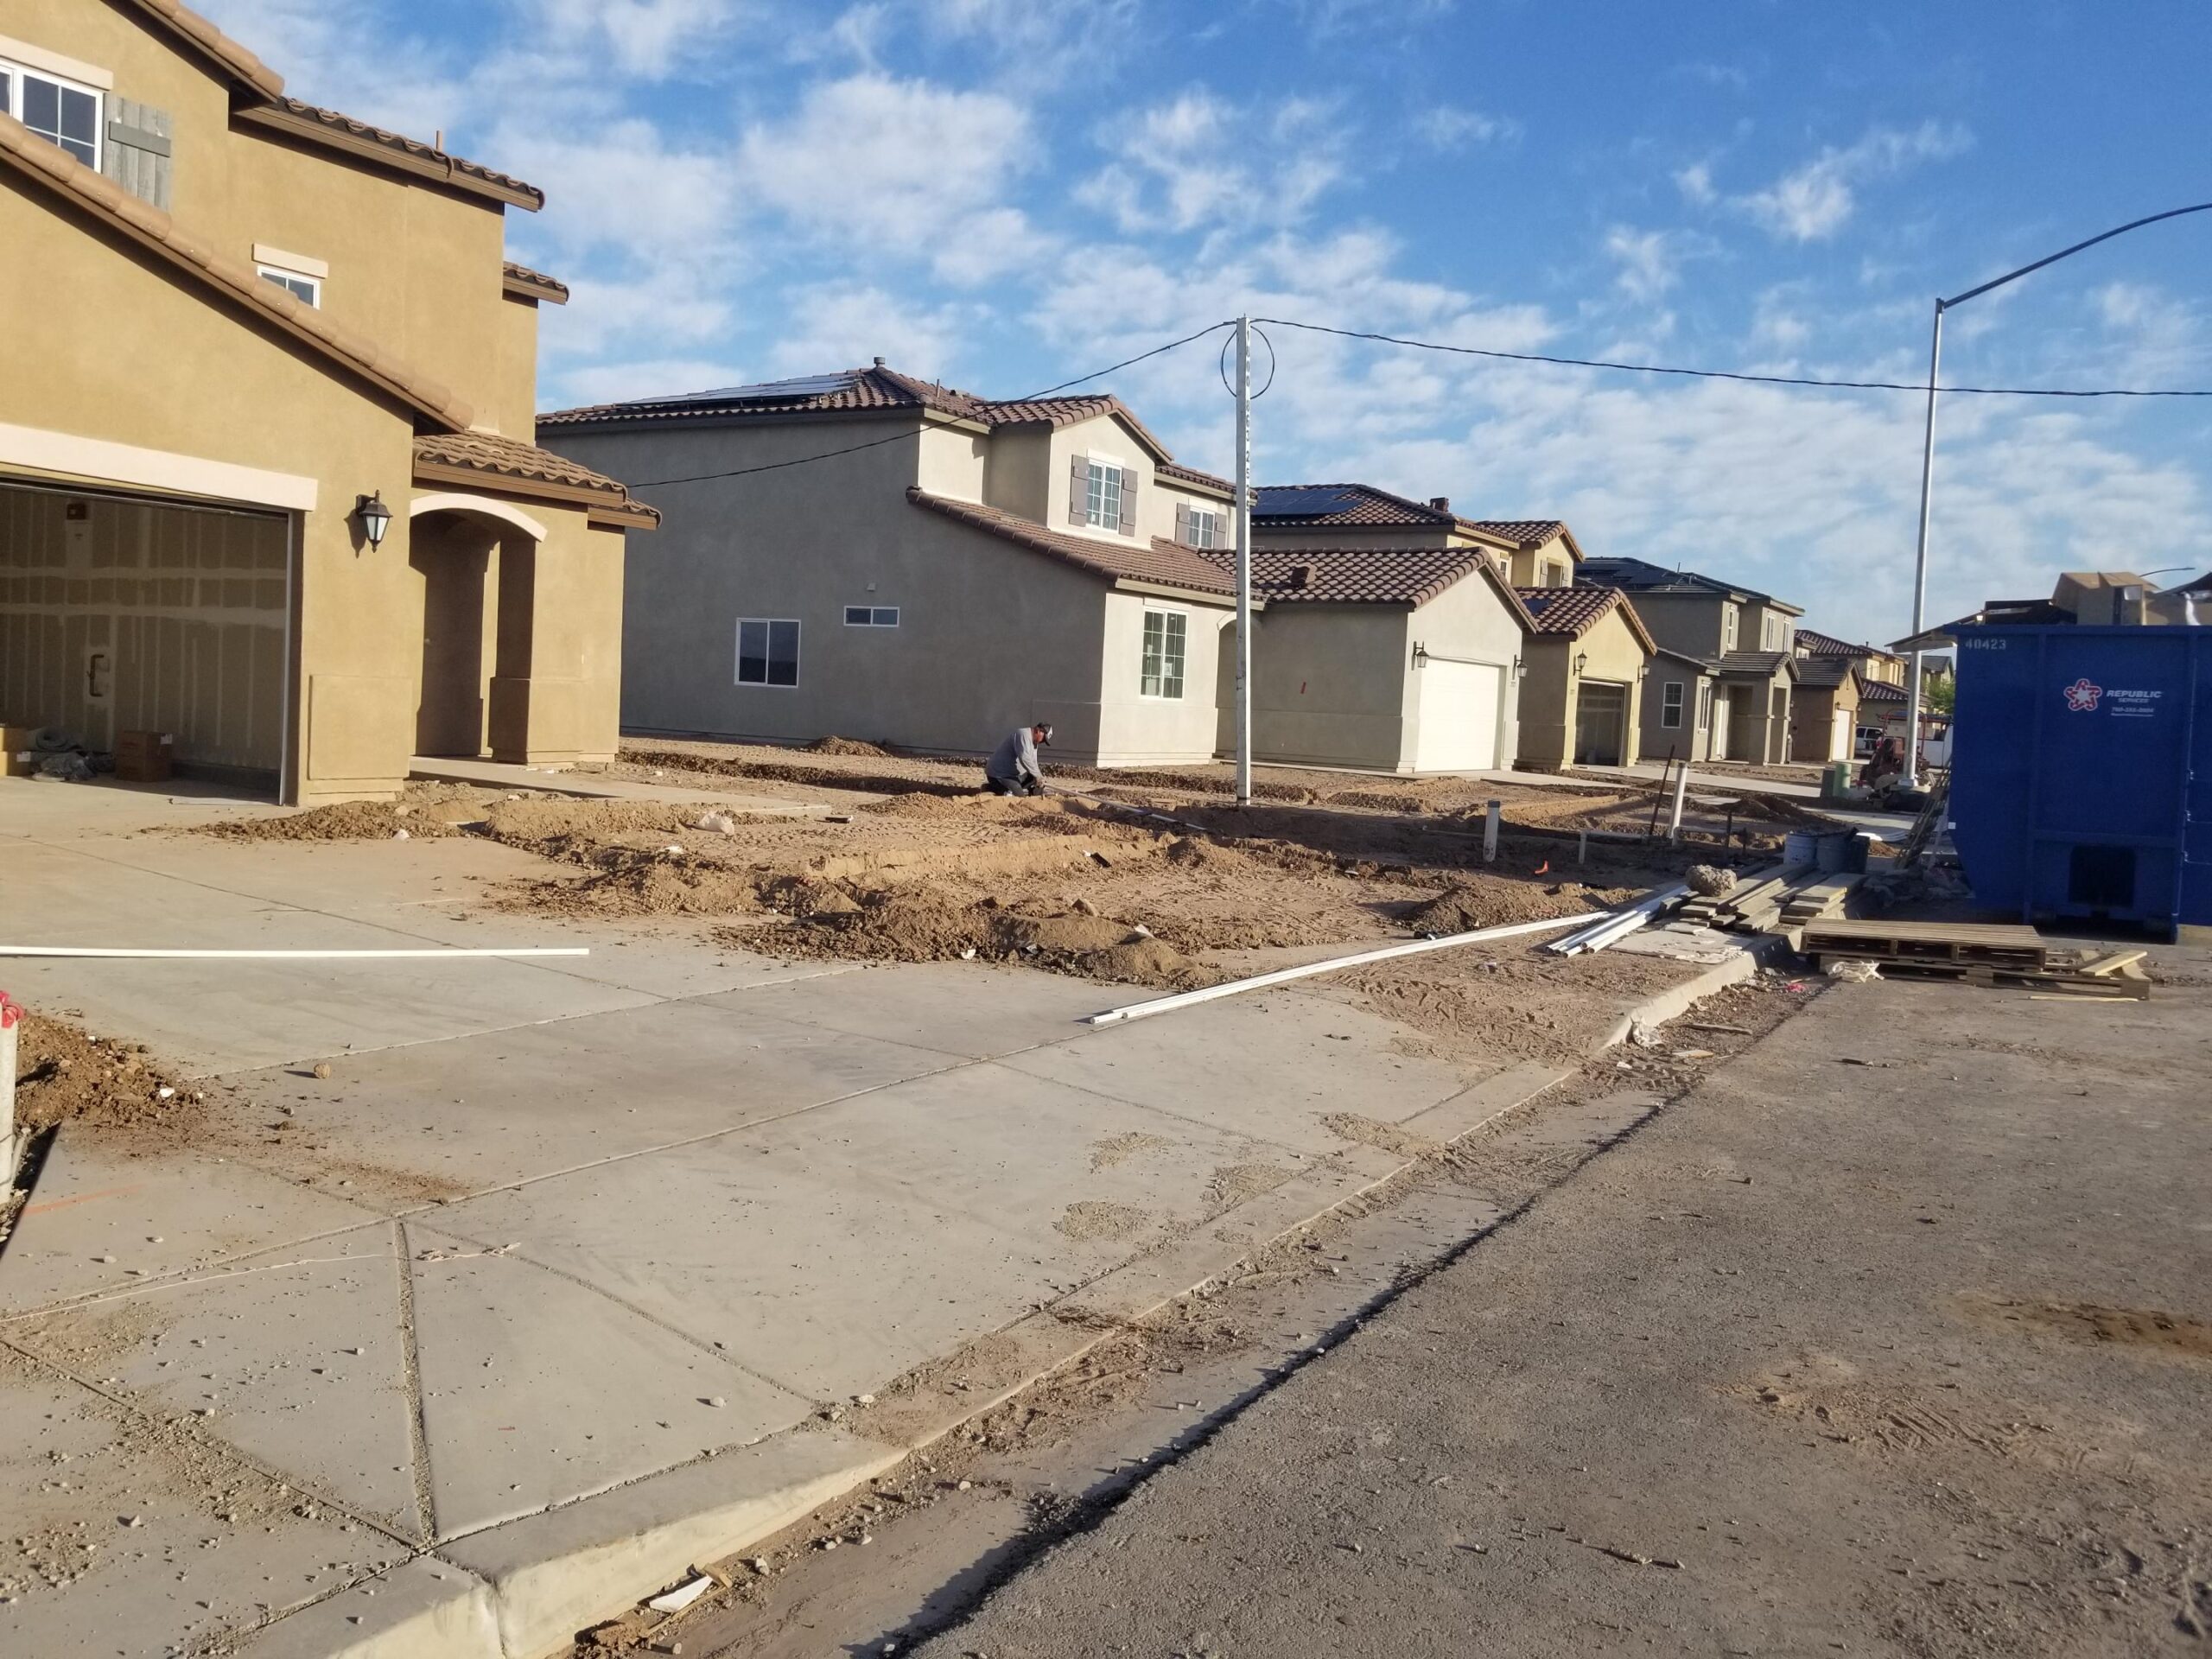 Pacific West Development Finishing Up Phase 53 at Vista del Valle